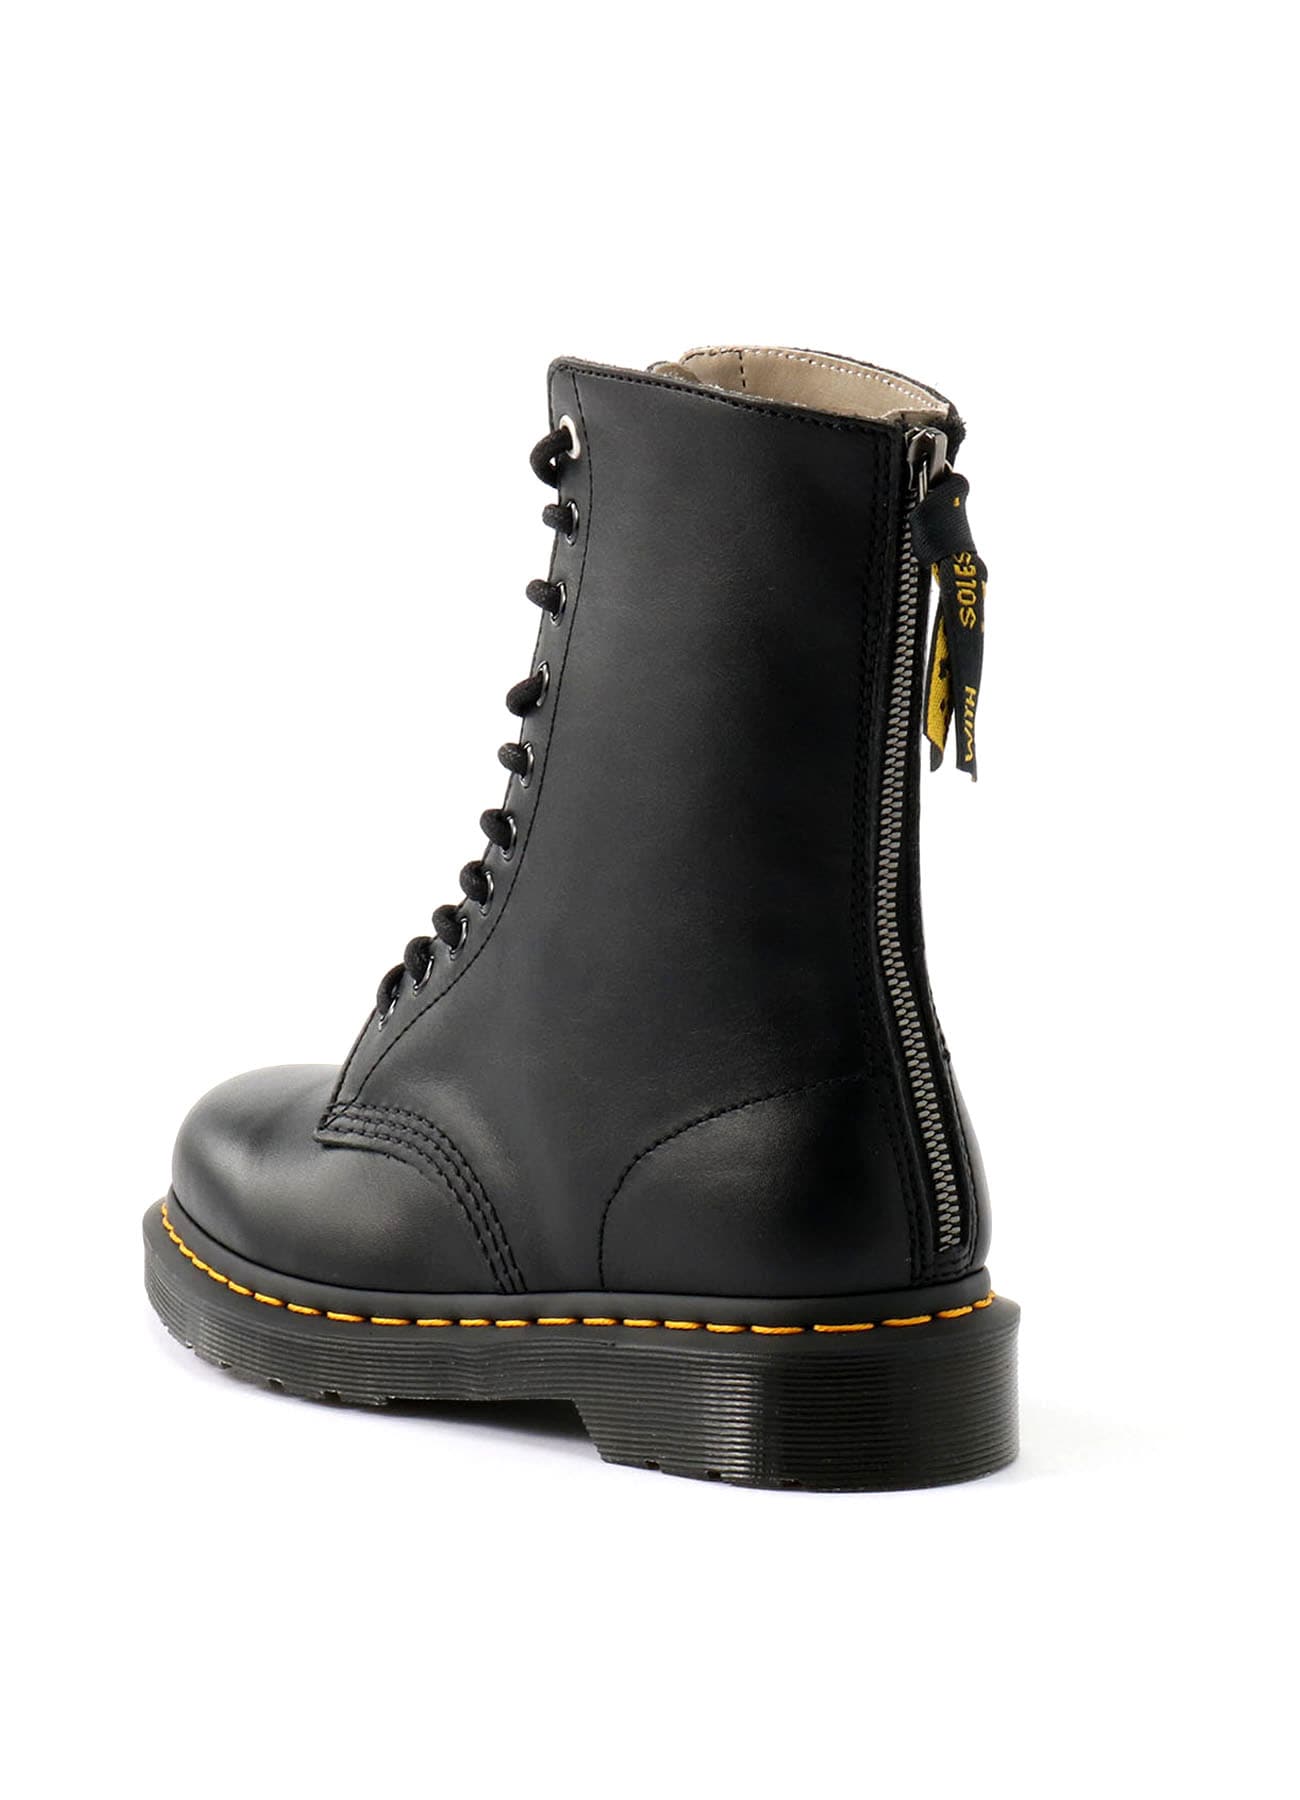 Y's × Dr.Martens 10EYE BOOT